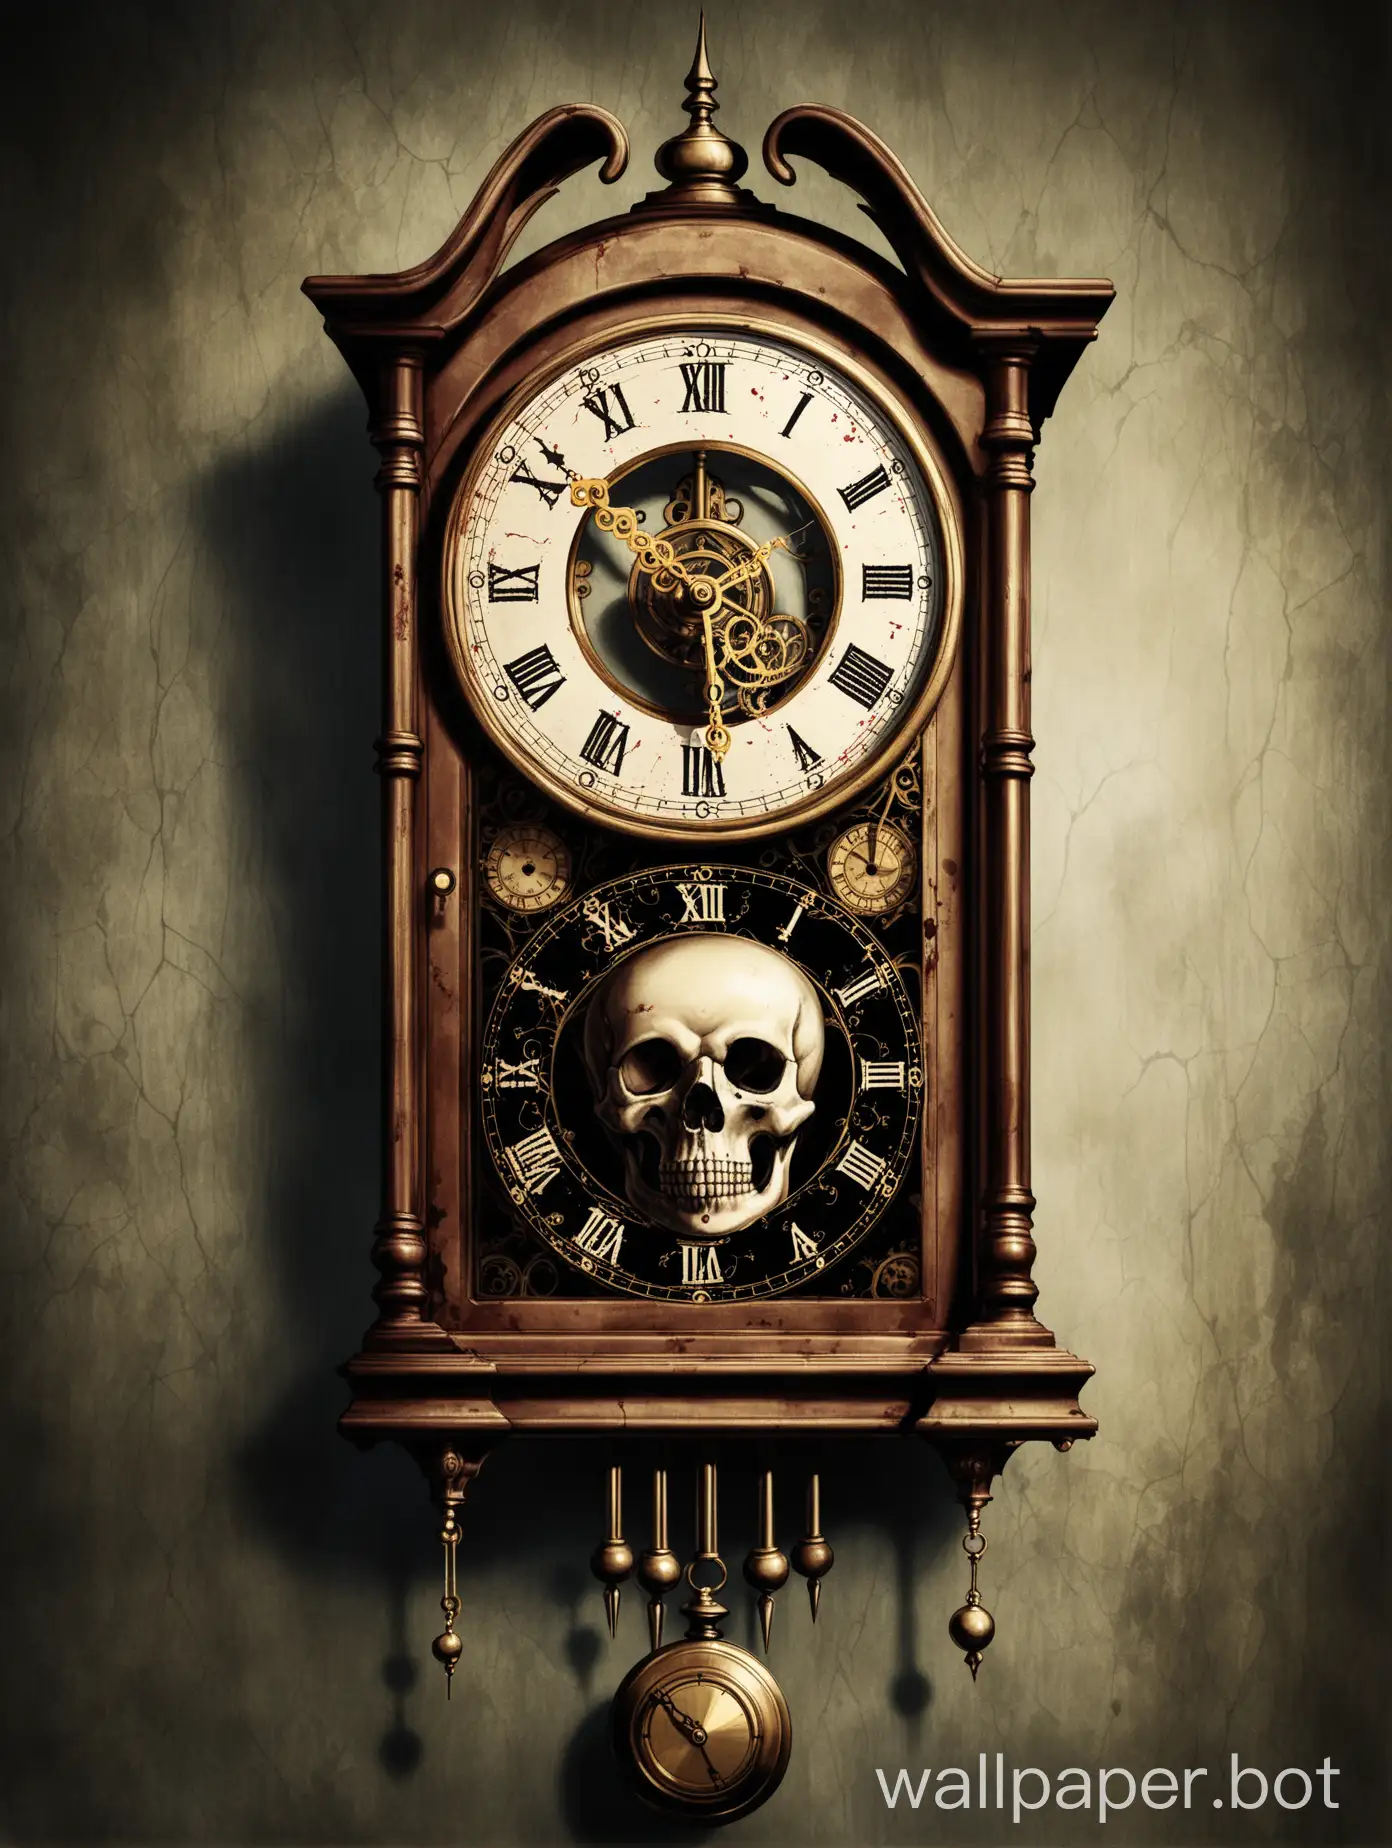 an old antique clock , it is 5 to twelve , around the clock are many dead souls , the clock is bloody , gloomy , you can see skulls and bones